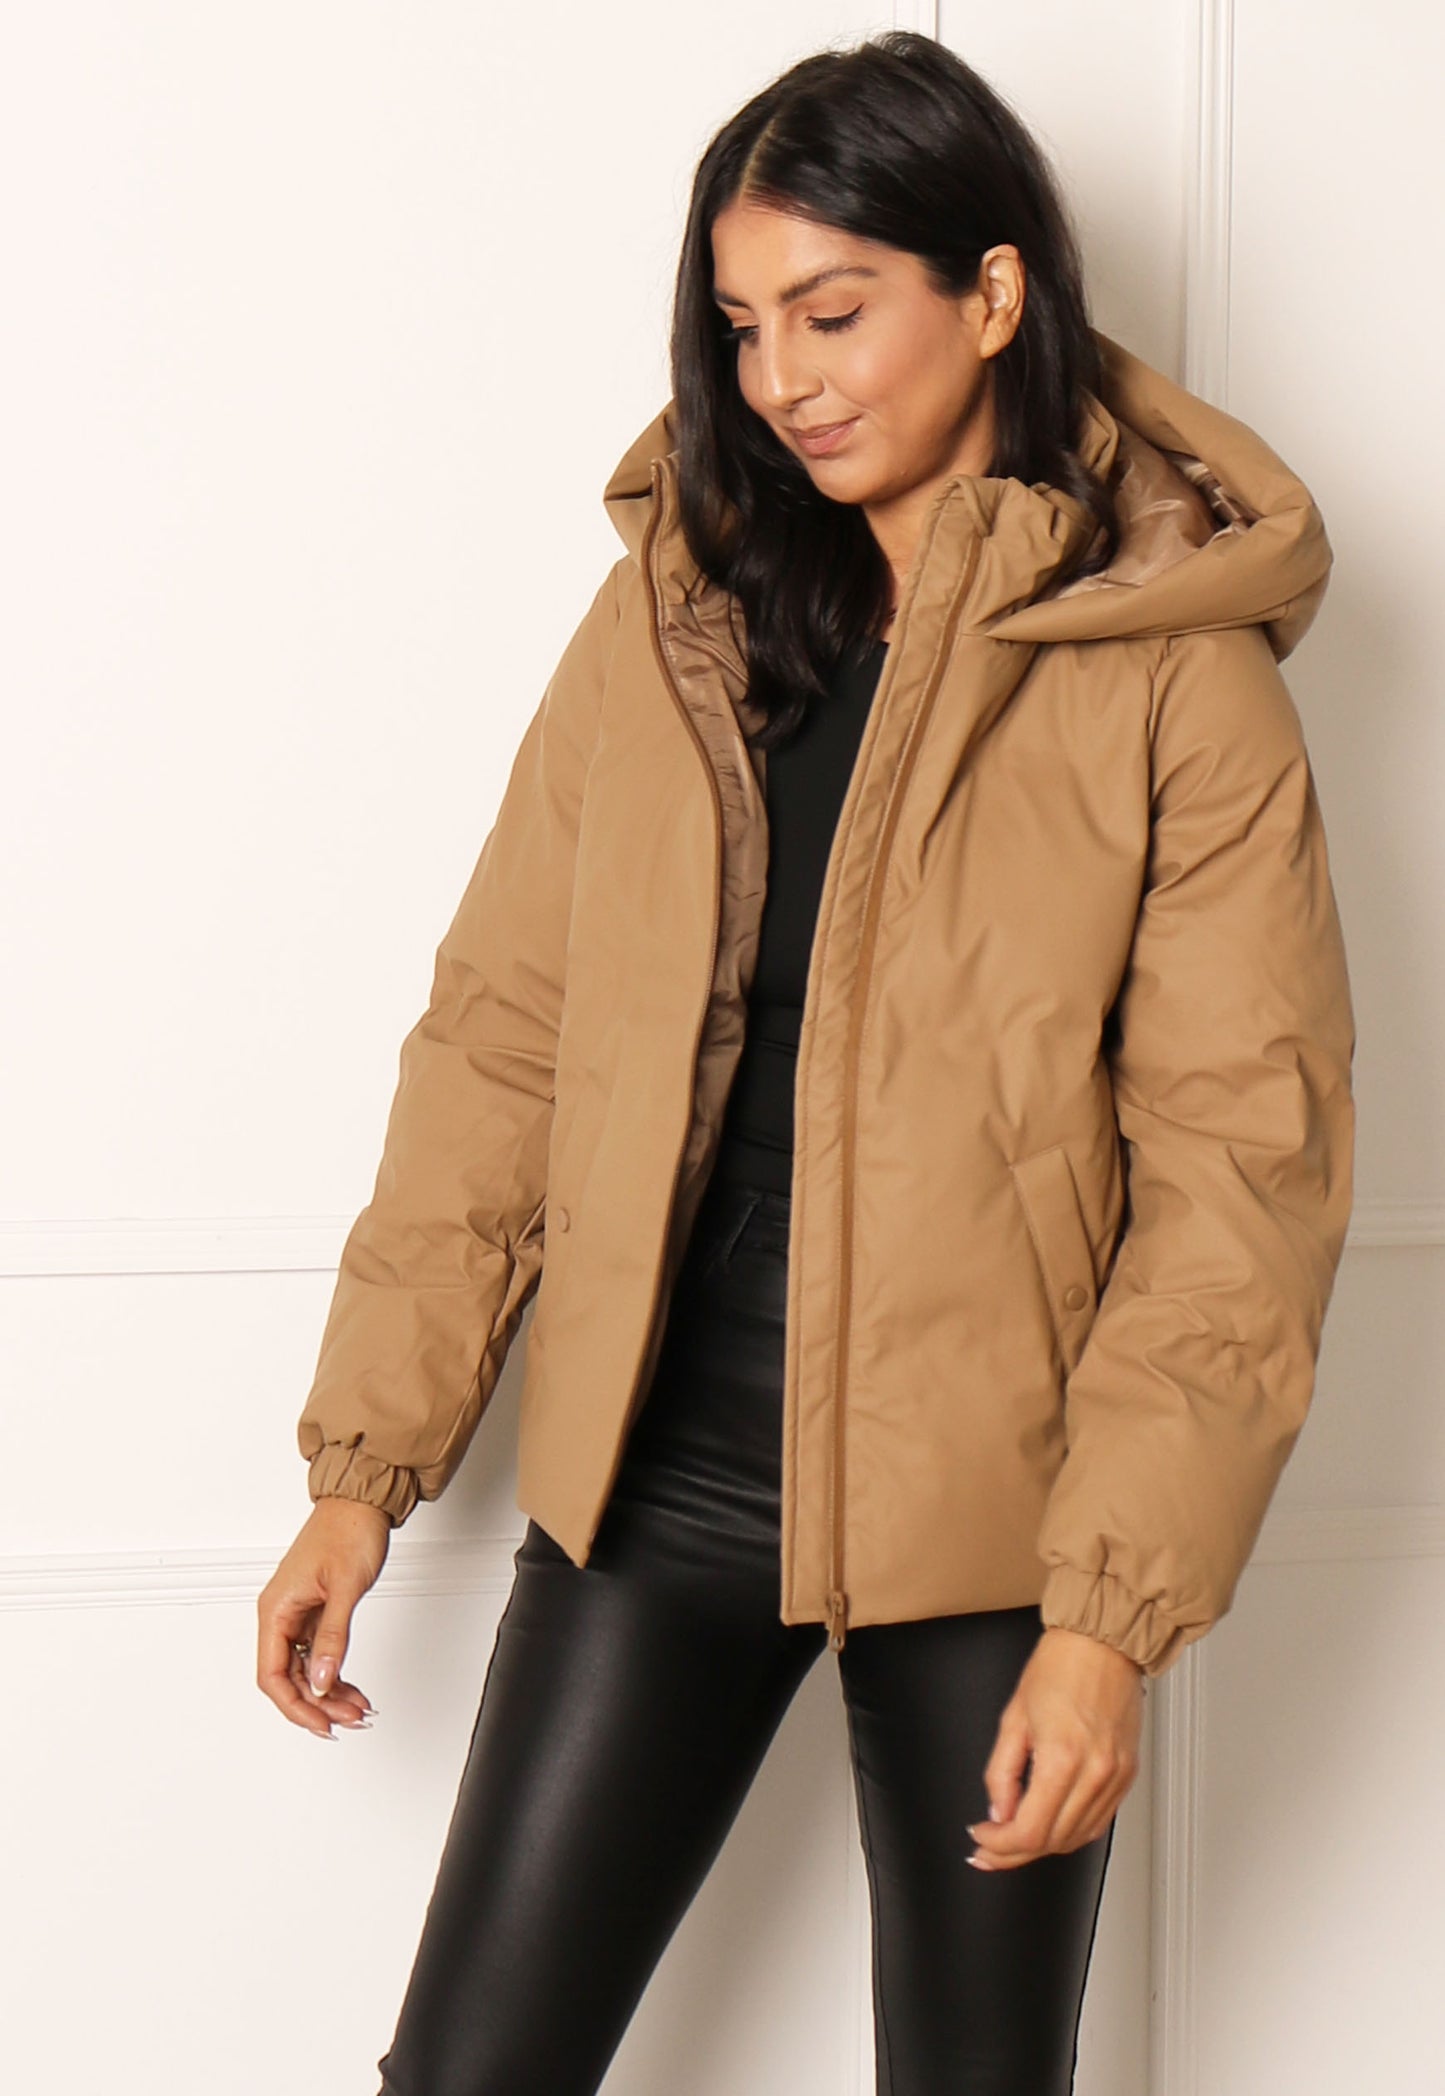 VERO MODA Noe Water Repellent Quilted Short Hooded Puffer Jacket in Soft Tan - concretebartops